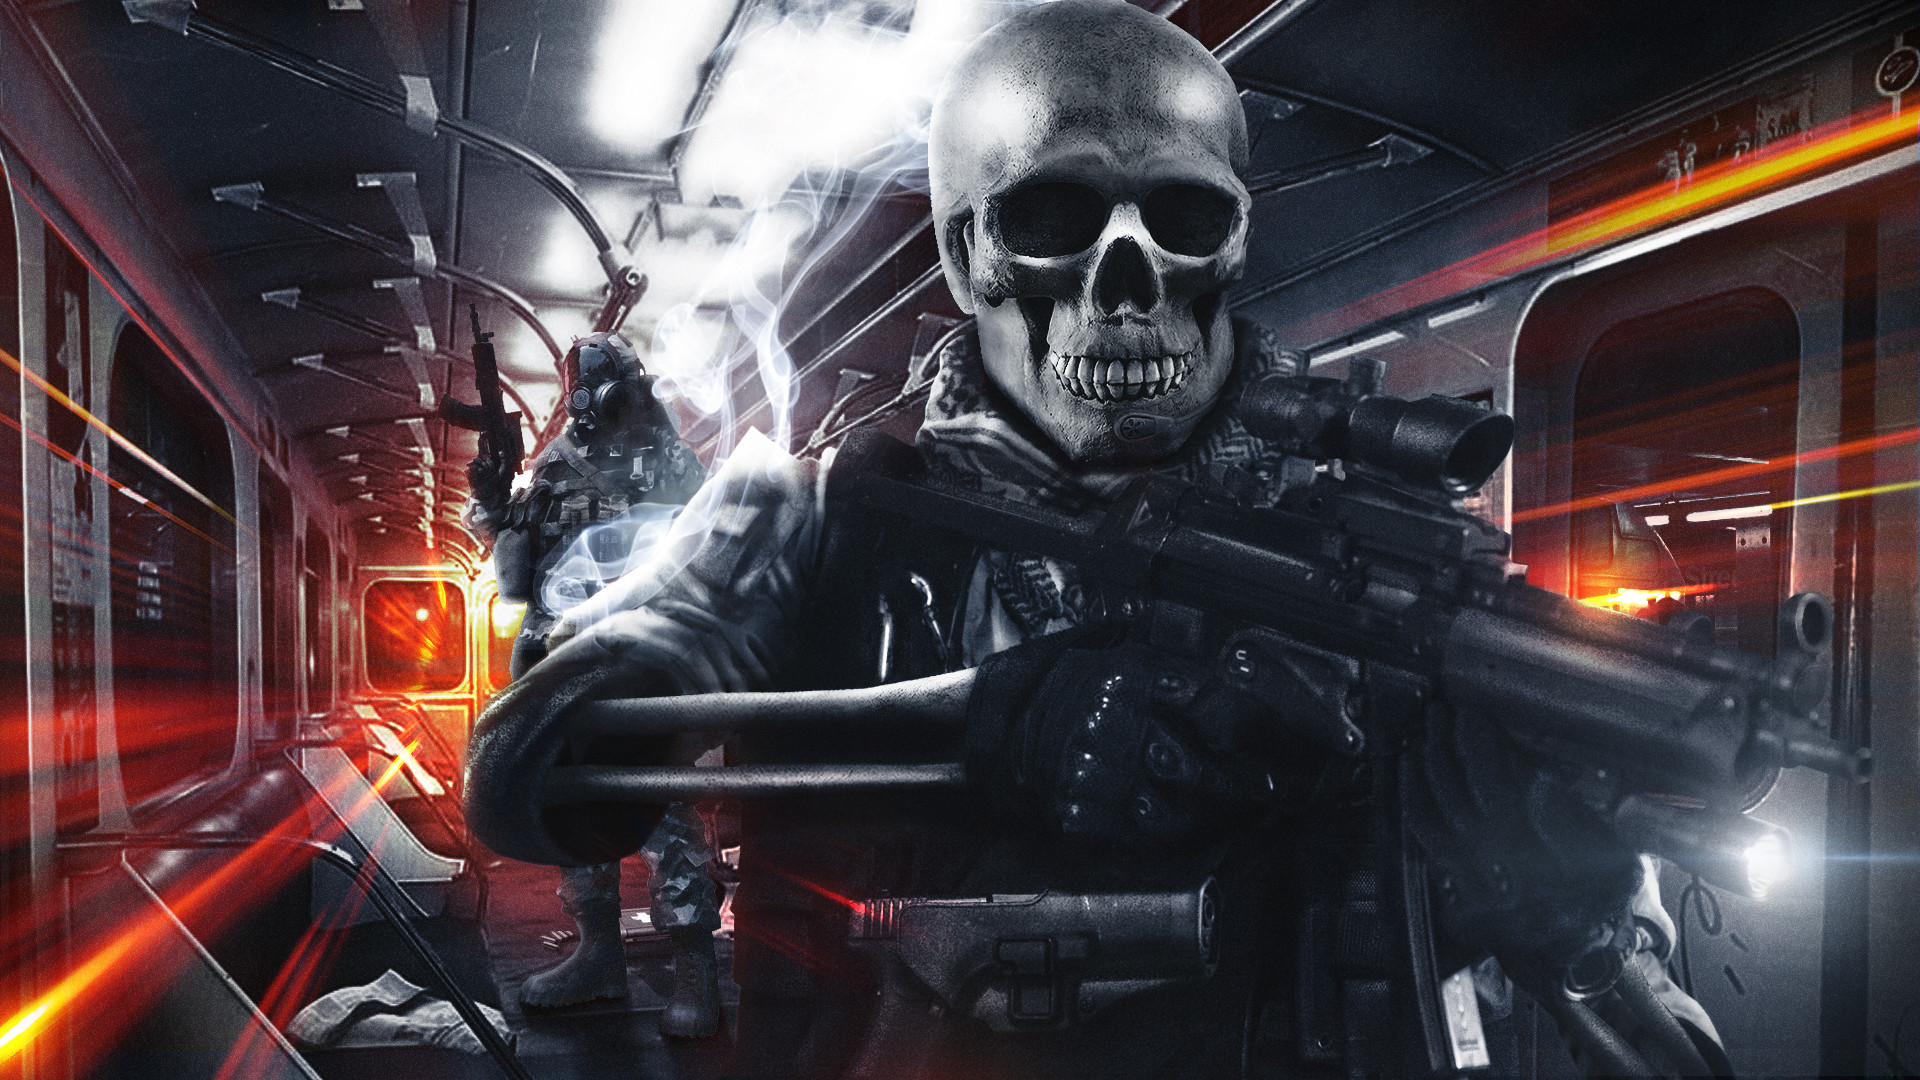 1920x1080 Skull Wallpaper, Hd Wallpaper, Wallpapers, Drawings And Illustrations, Army  Soldier, Ghost Rider, Skeletons, Soldiers, Skulls